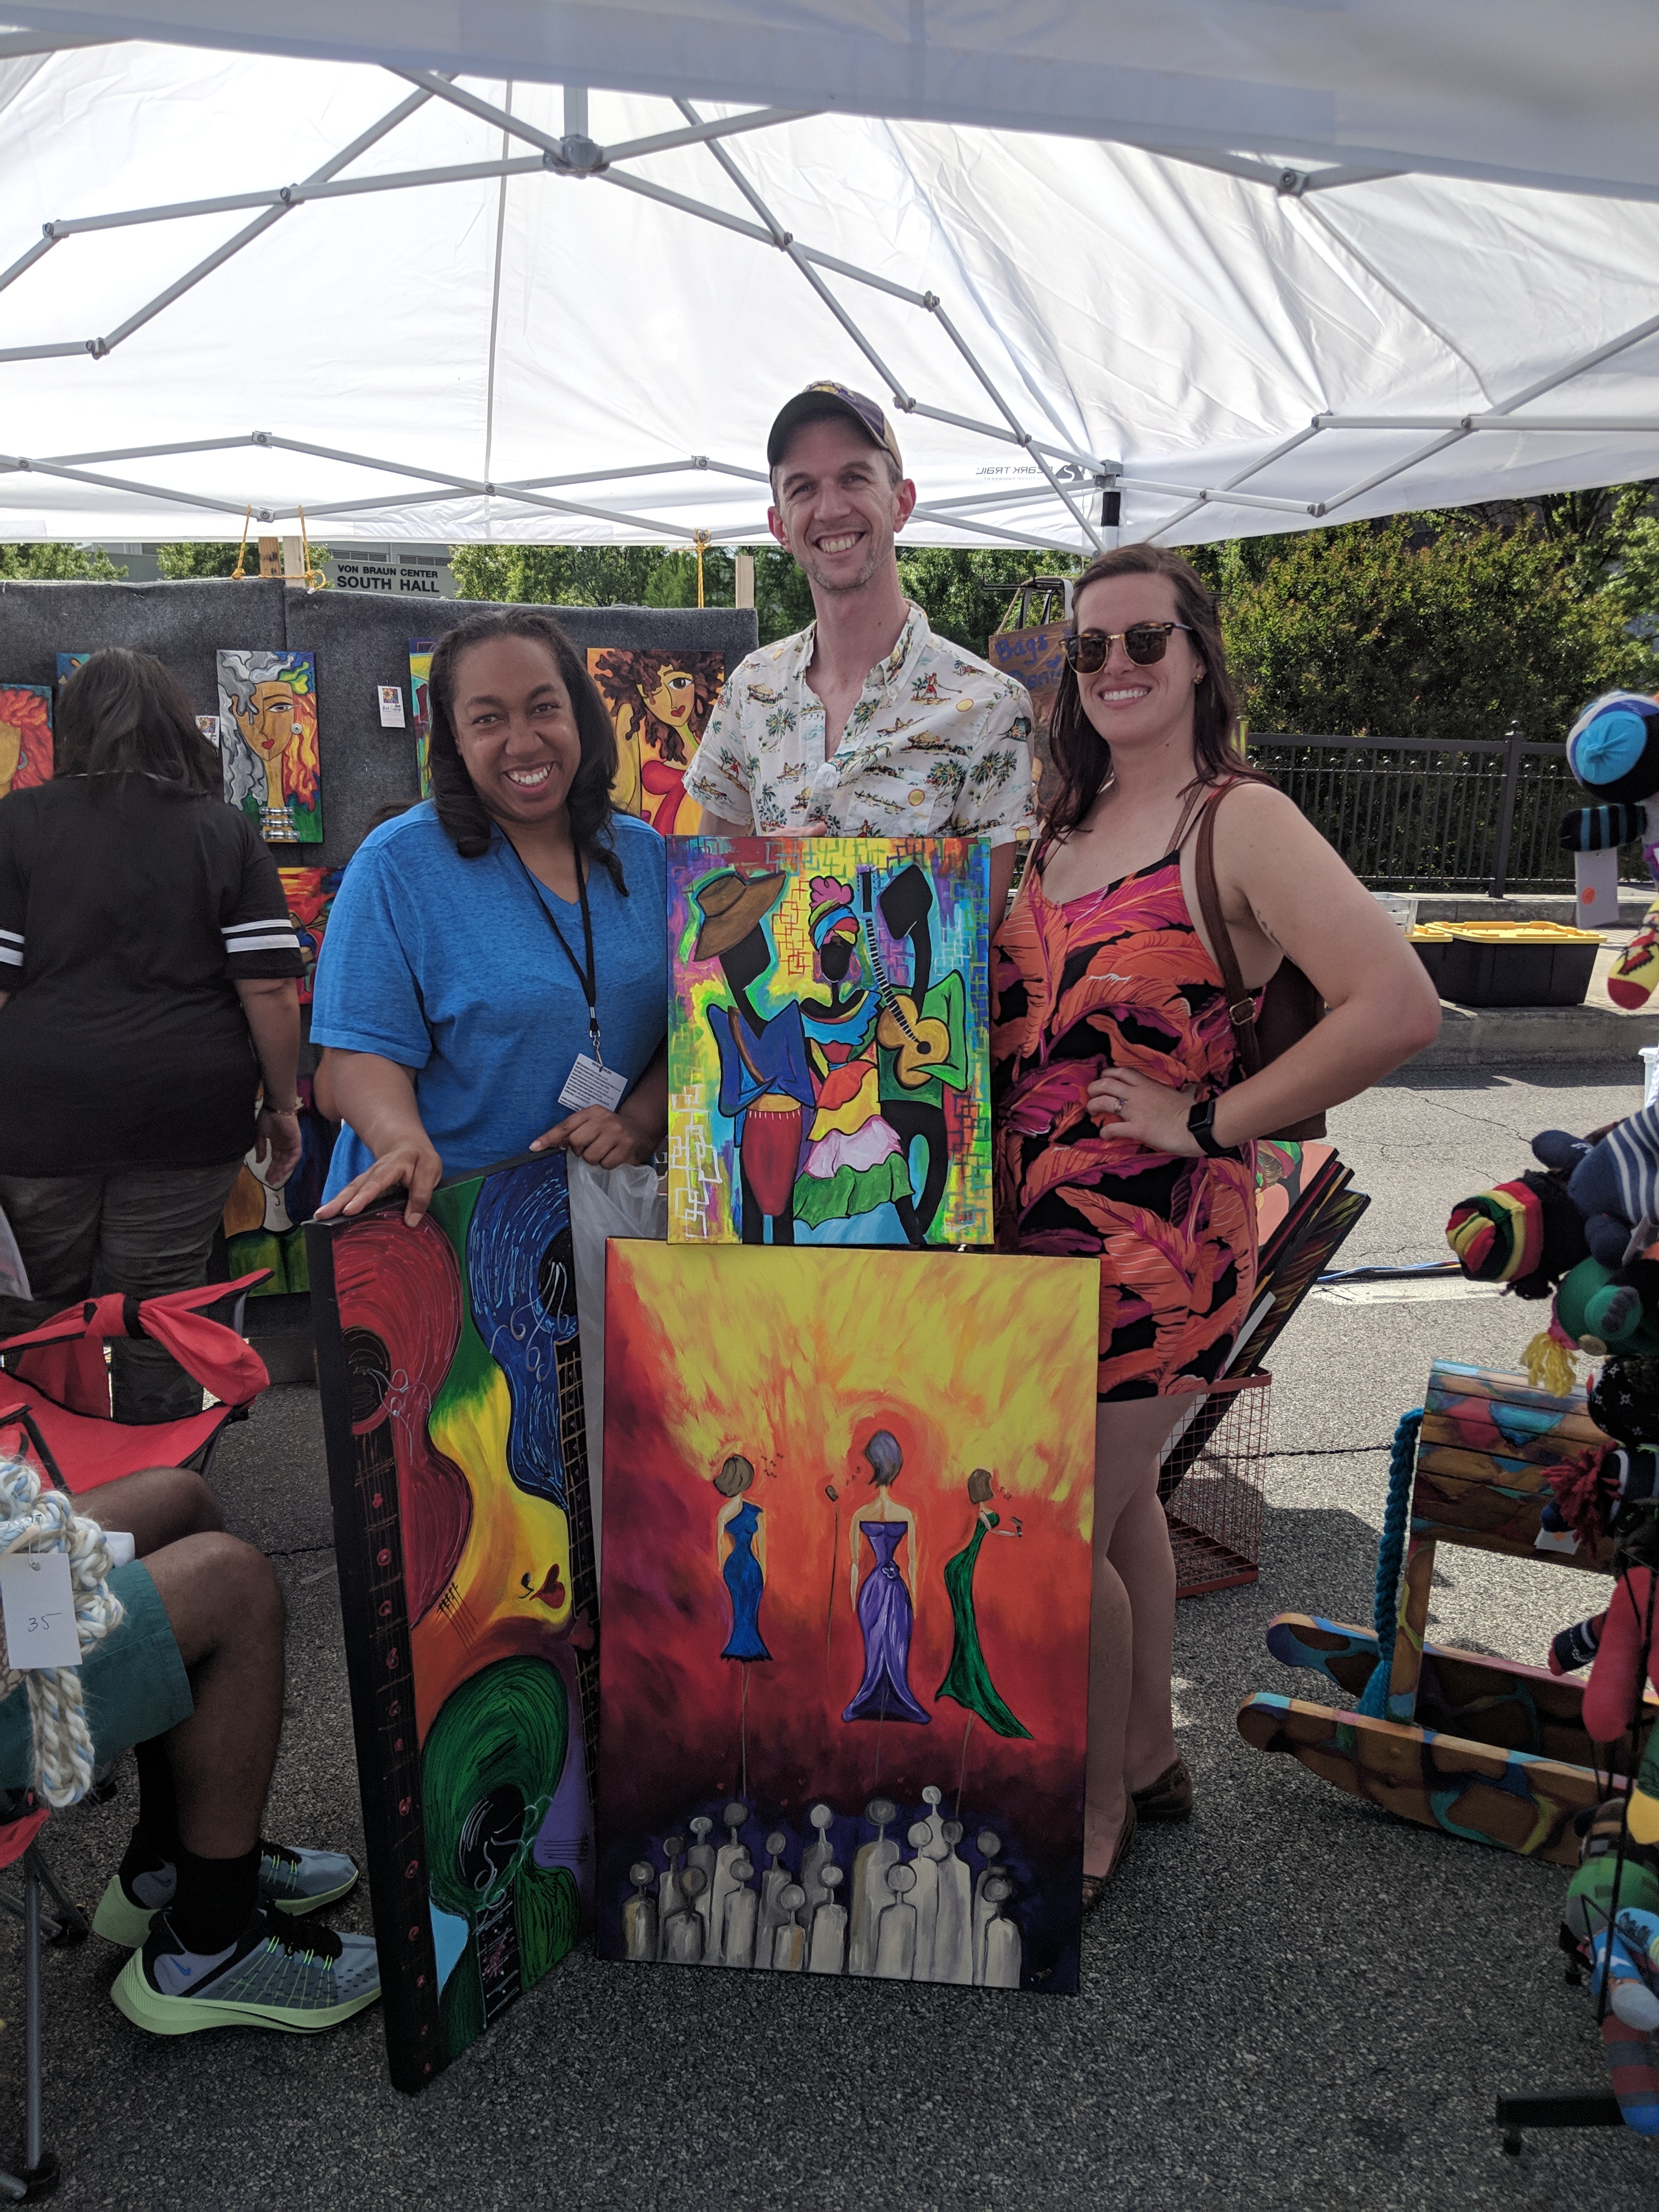 40th Annual Panoply Arts Festival